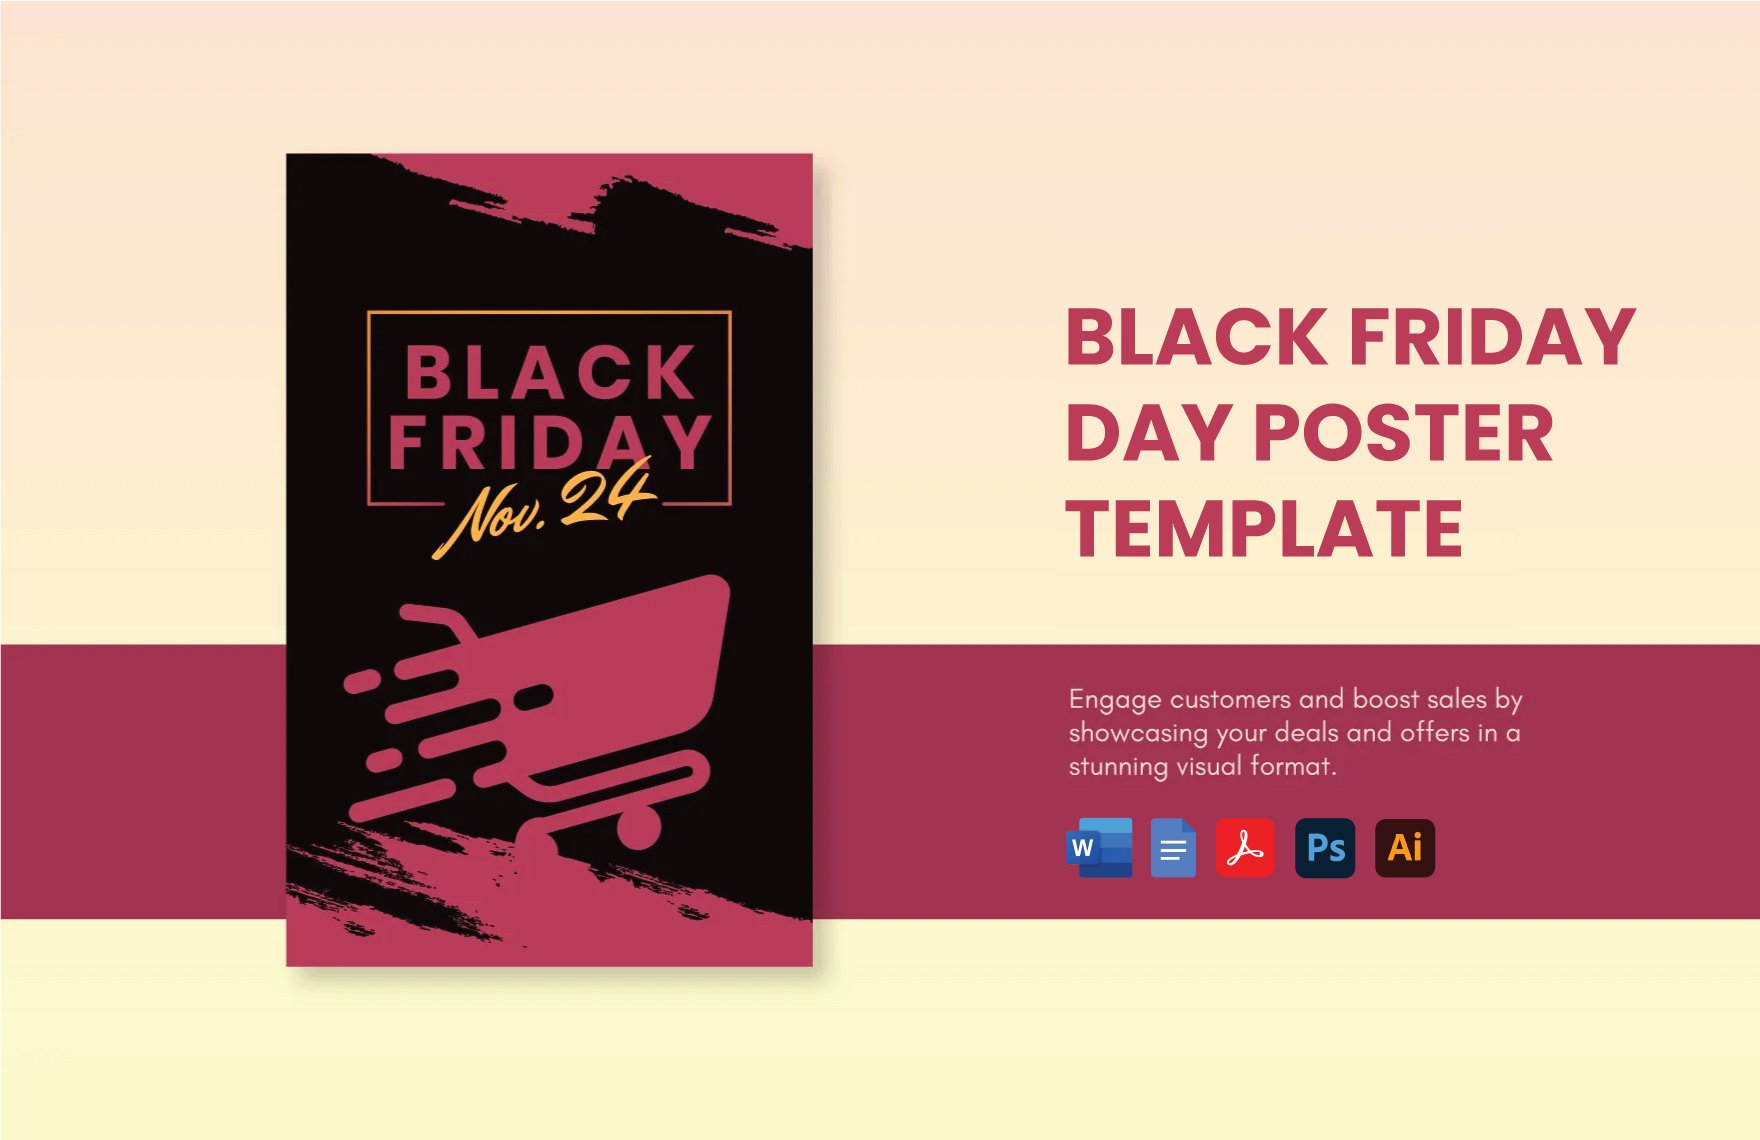 Black Friday Poster Template